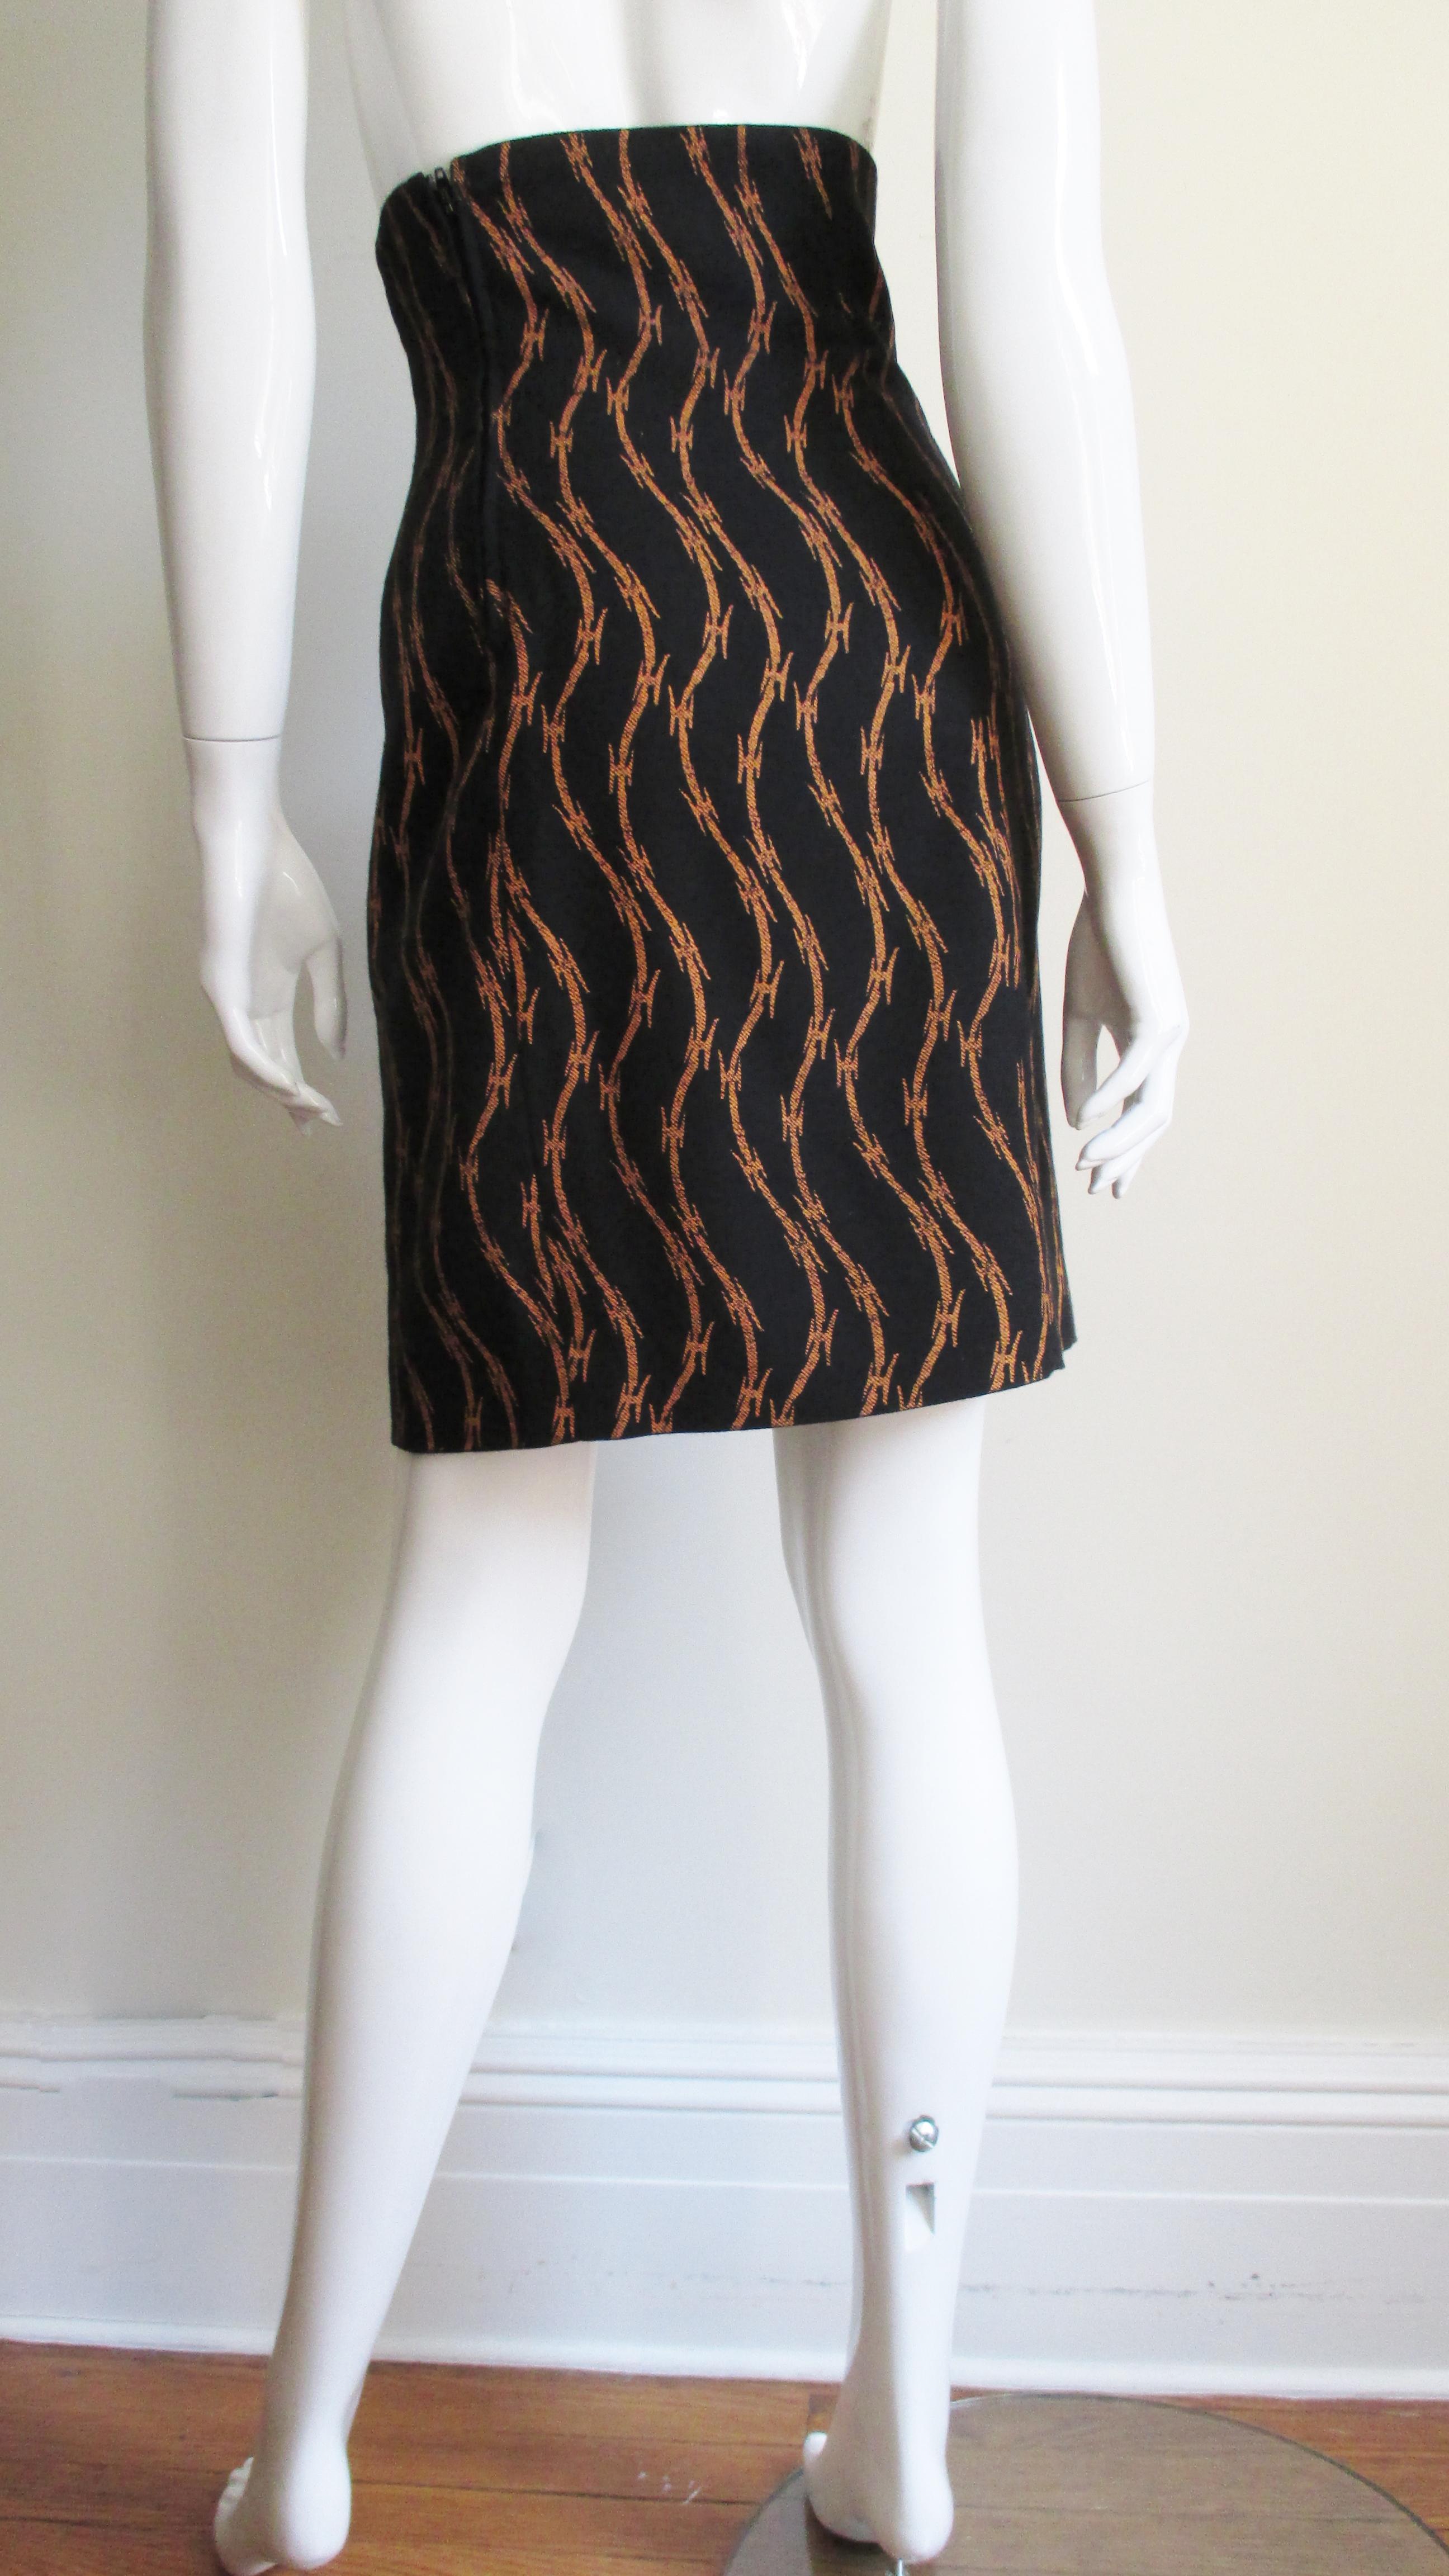 Stephen Sprouse Iconic Barb Wire Print Skirt 1980s For Sale 1